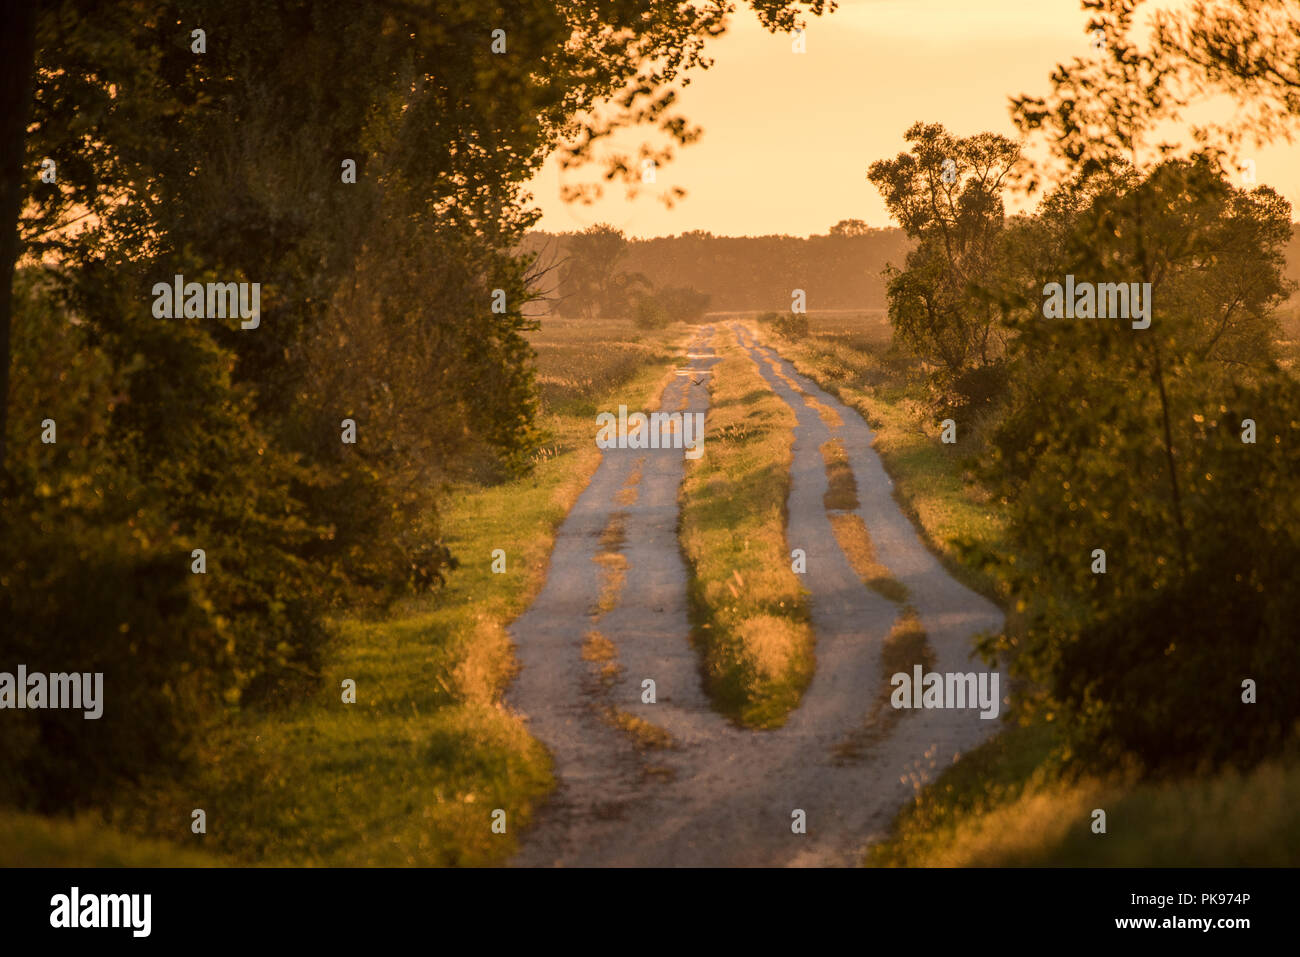 Summertime view of a country road from a rural part of Wisconsin.  The sun is setting bathing everything in a golden light. Stock Photo